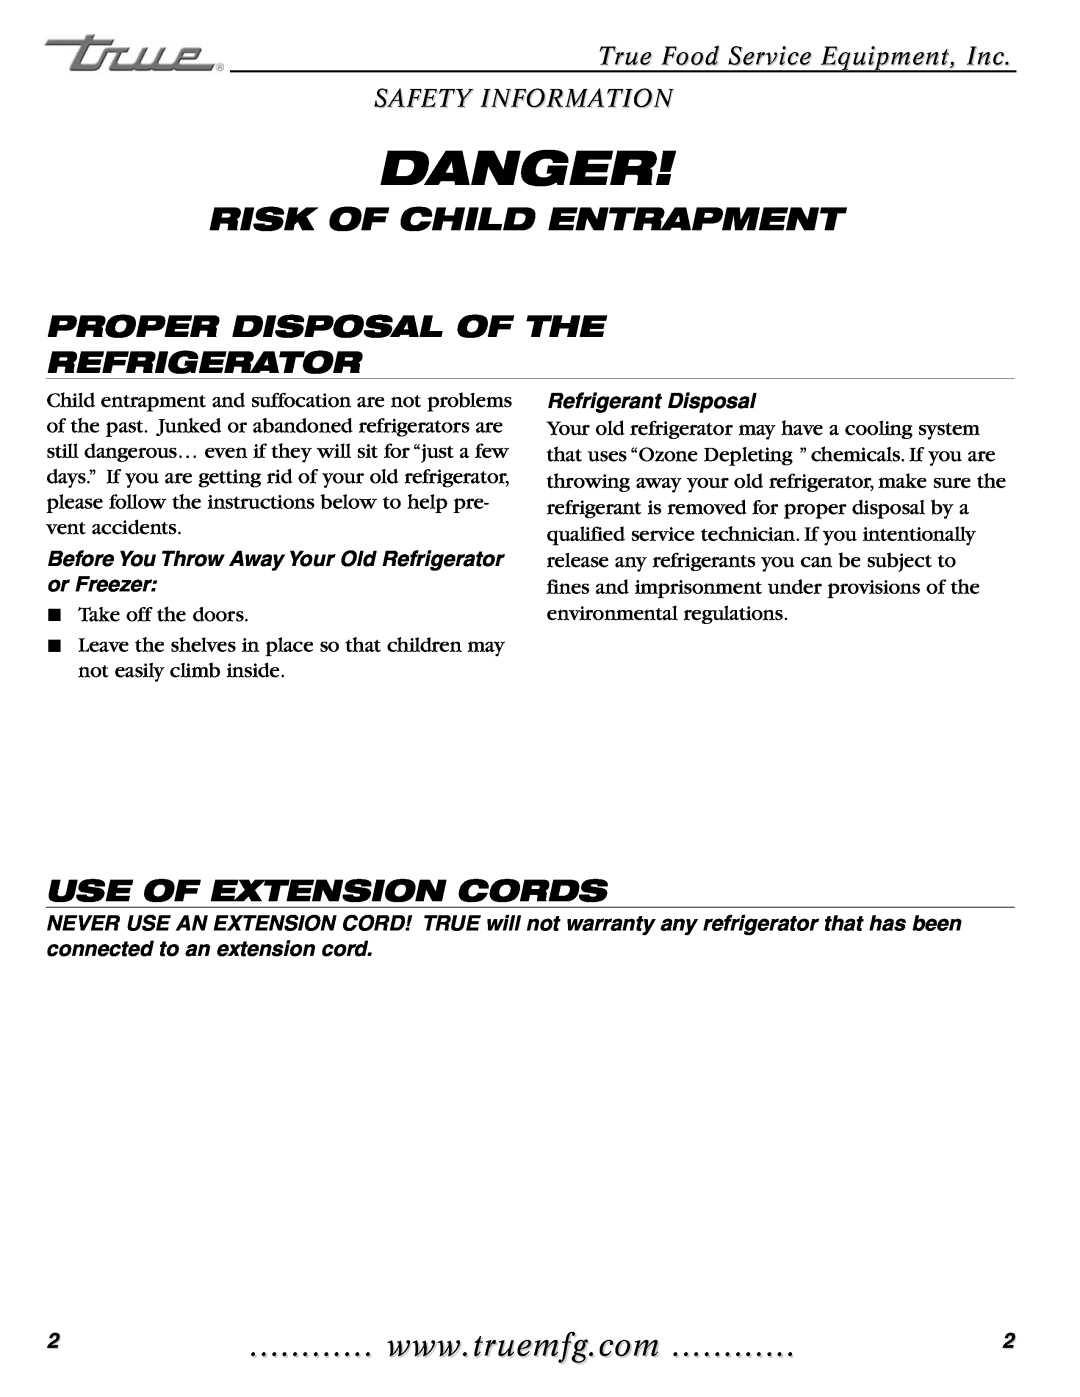 True Manufacturing Company TMC-34-S Risk Of Child Entrapment, Proper Disposal Of The Refrigerator, Use Of Extension Cords 